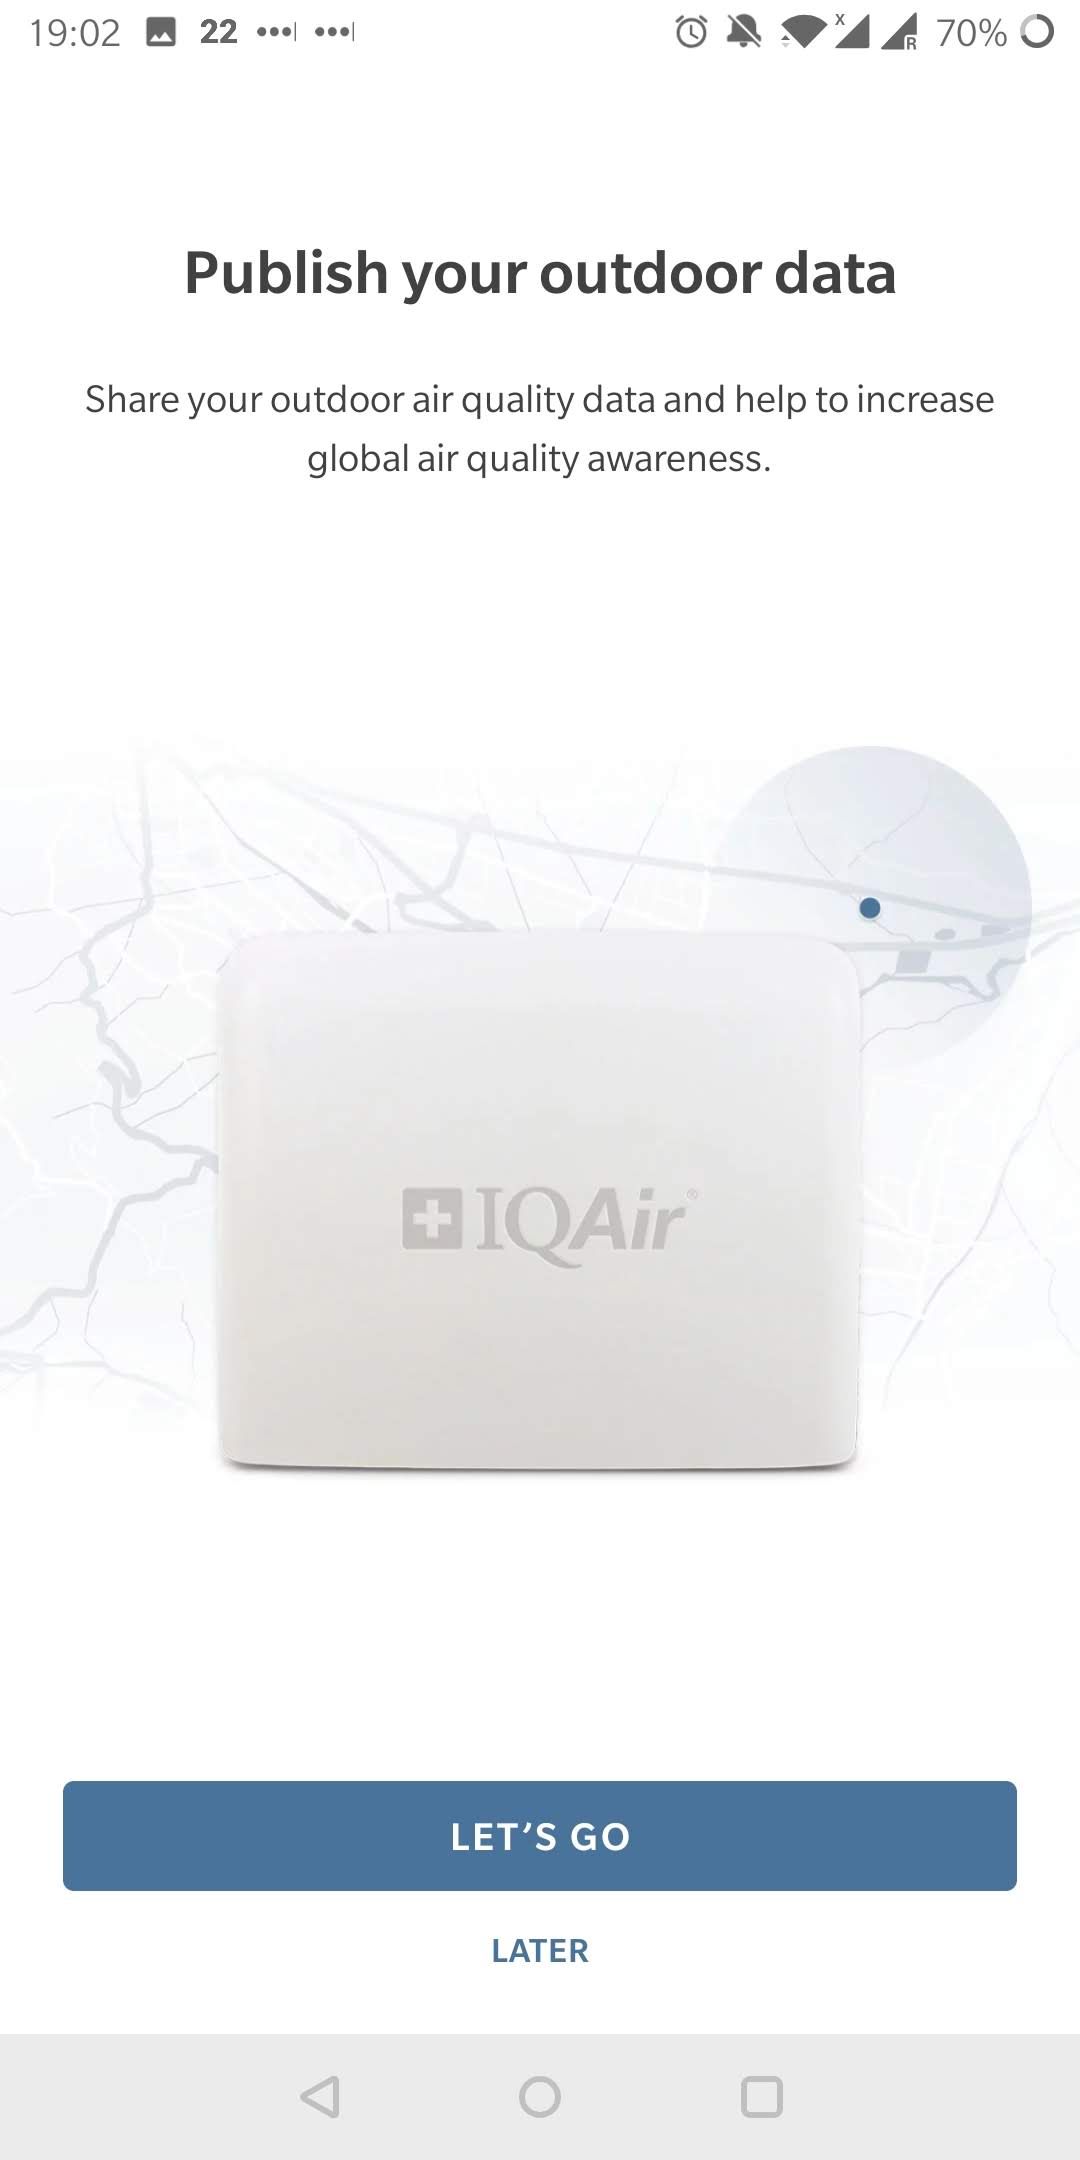 iQAir AirVisual App Publish Your Outdoor Data